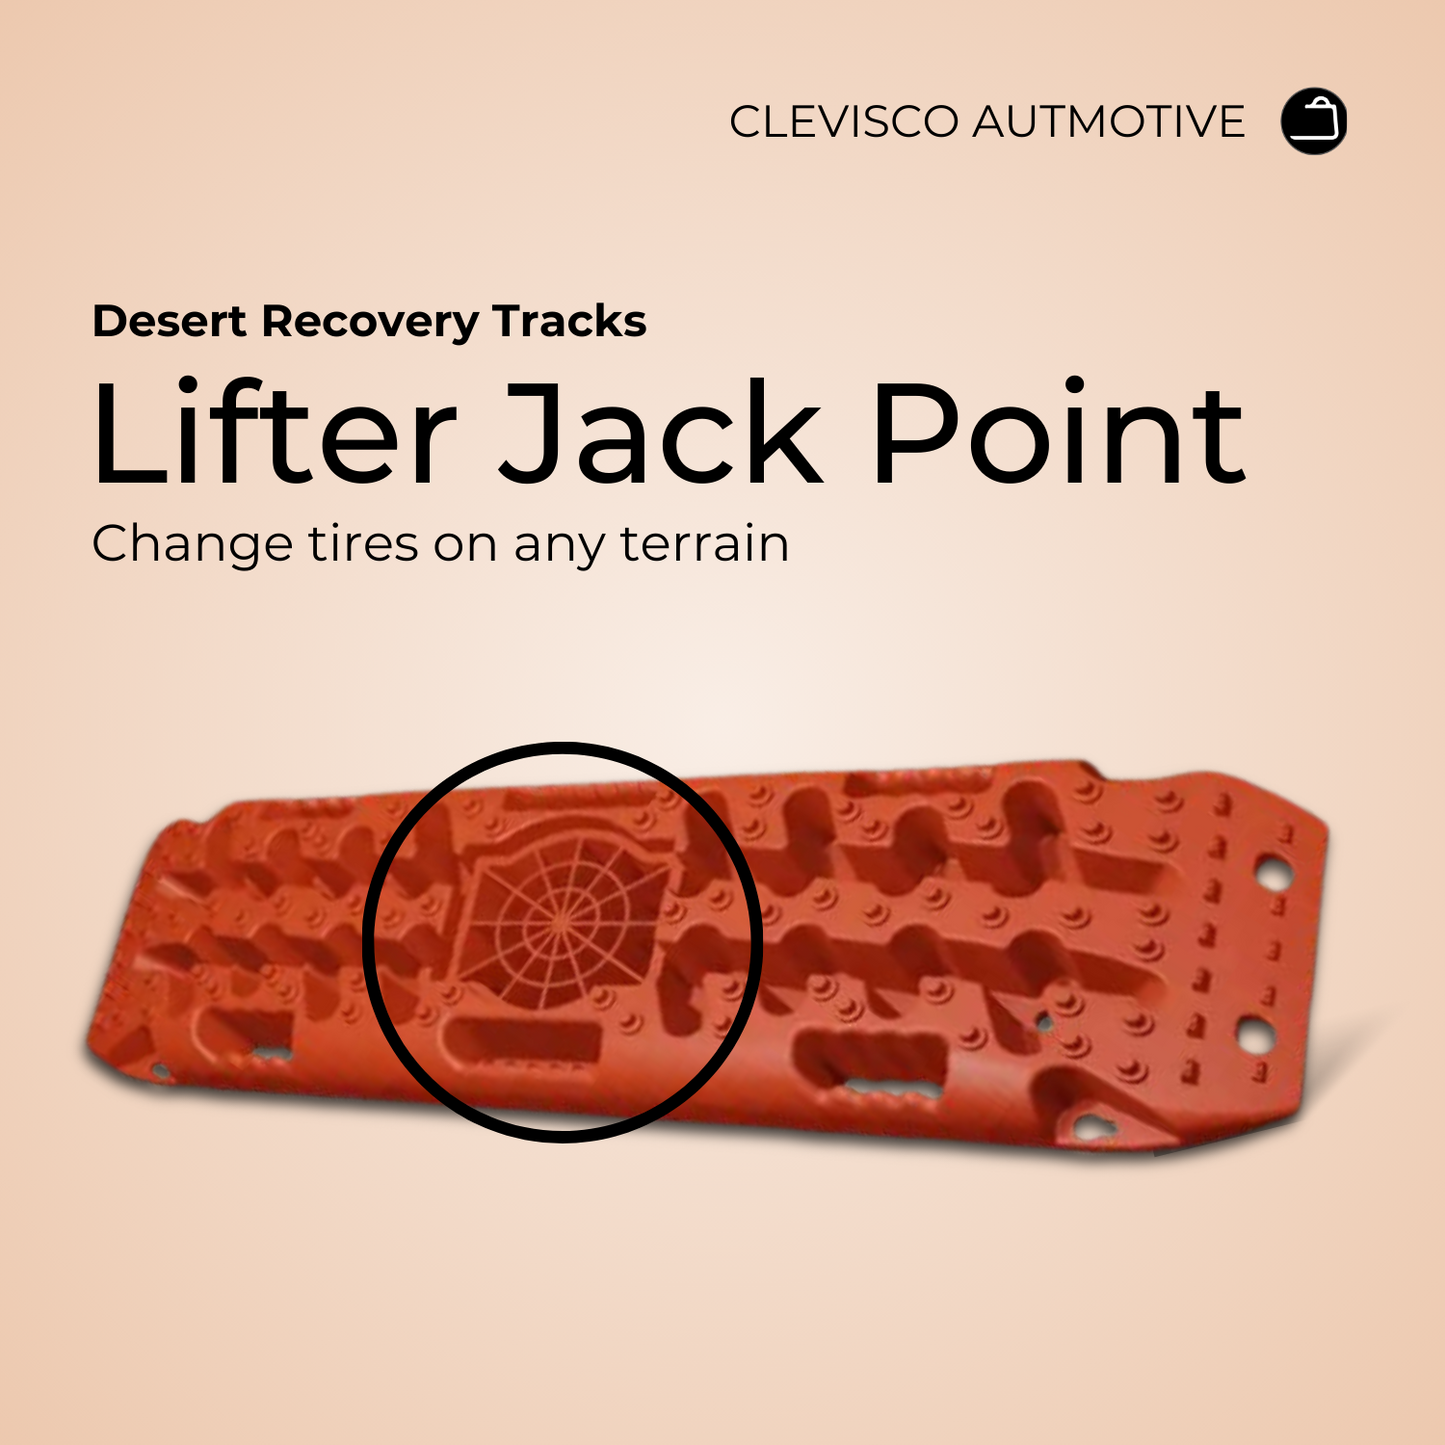 Promotional graphic by Clevisco Automotive showcasing their Desert Recovery Tracks with a feature highlight on the Lifter Jack Point, set against a desert sand-colored background for easy tire changes on any terrain.